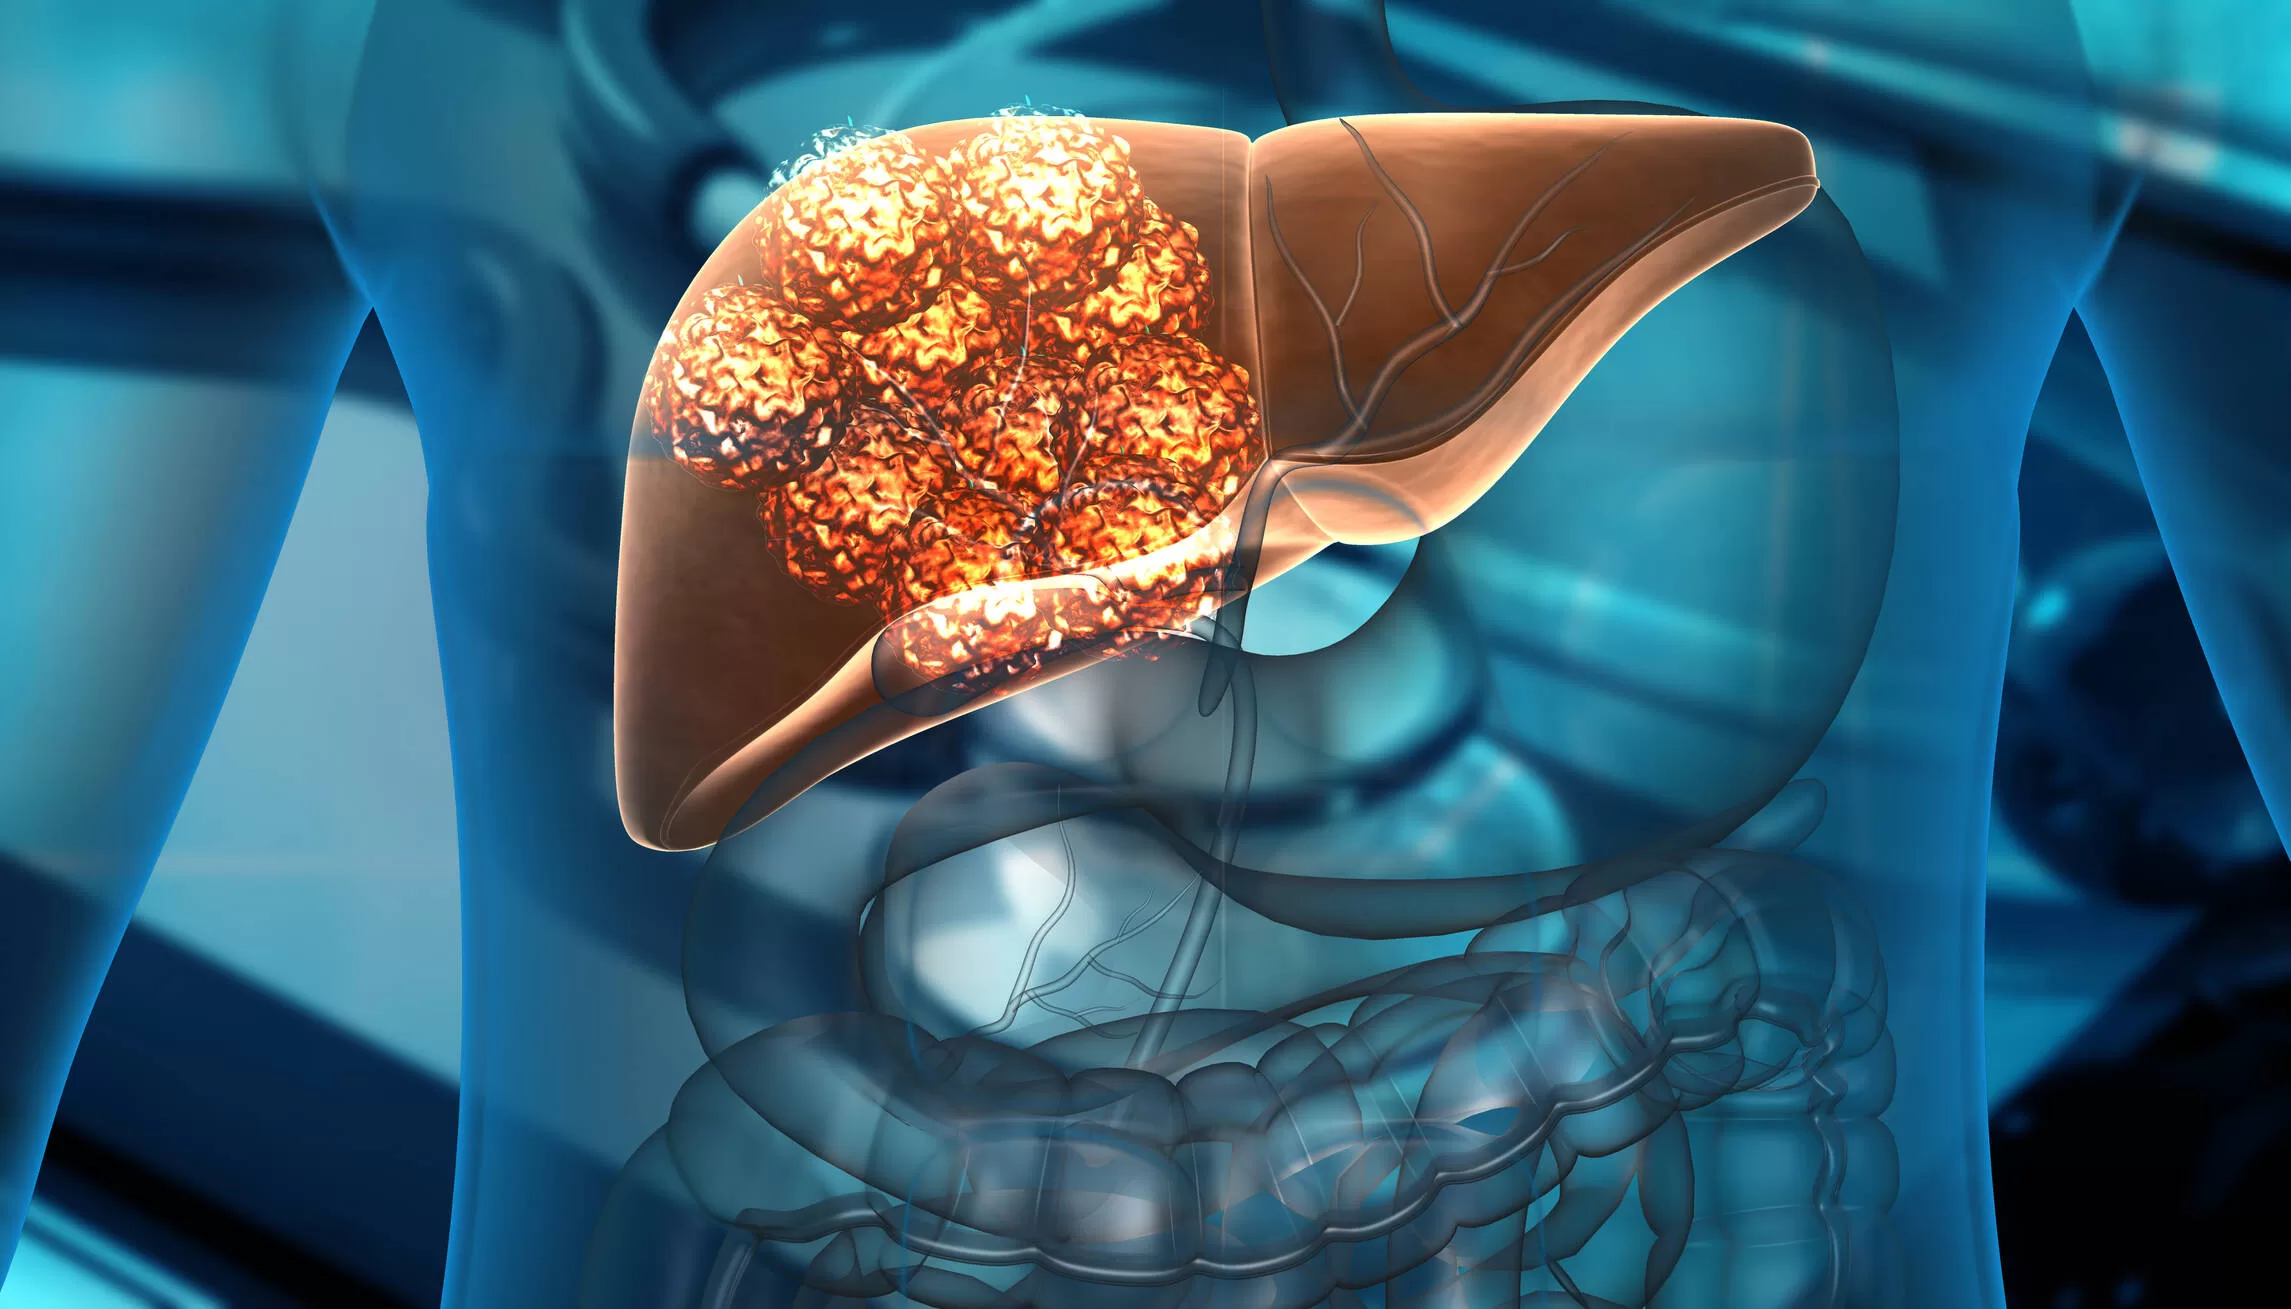 Liver cancer: these are the symptoms you should know to detect it in time
